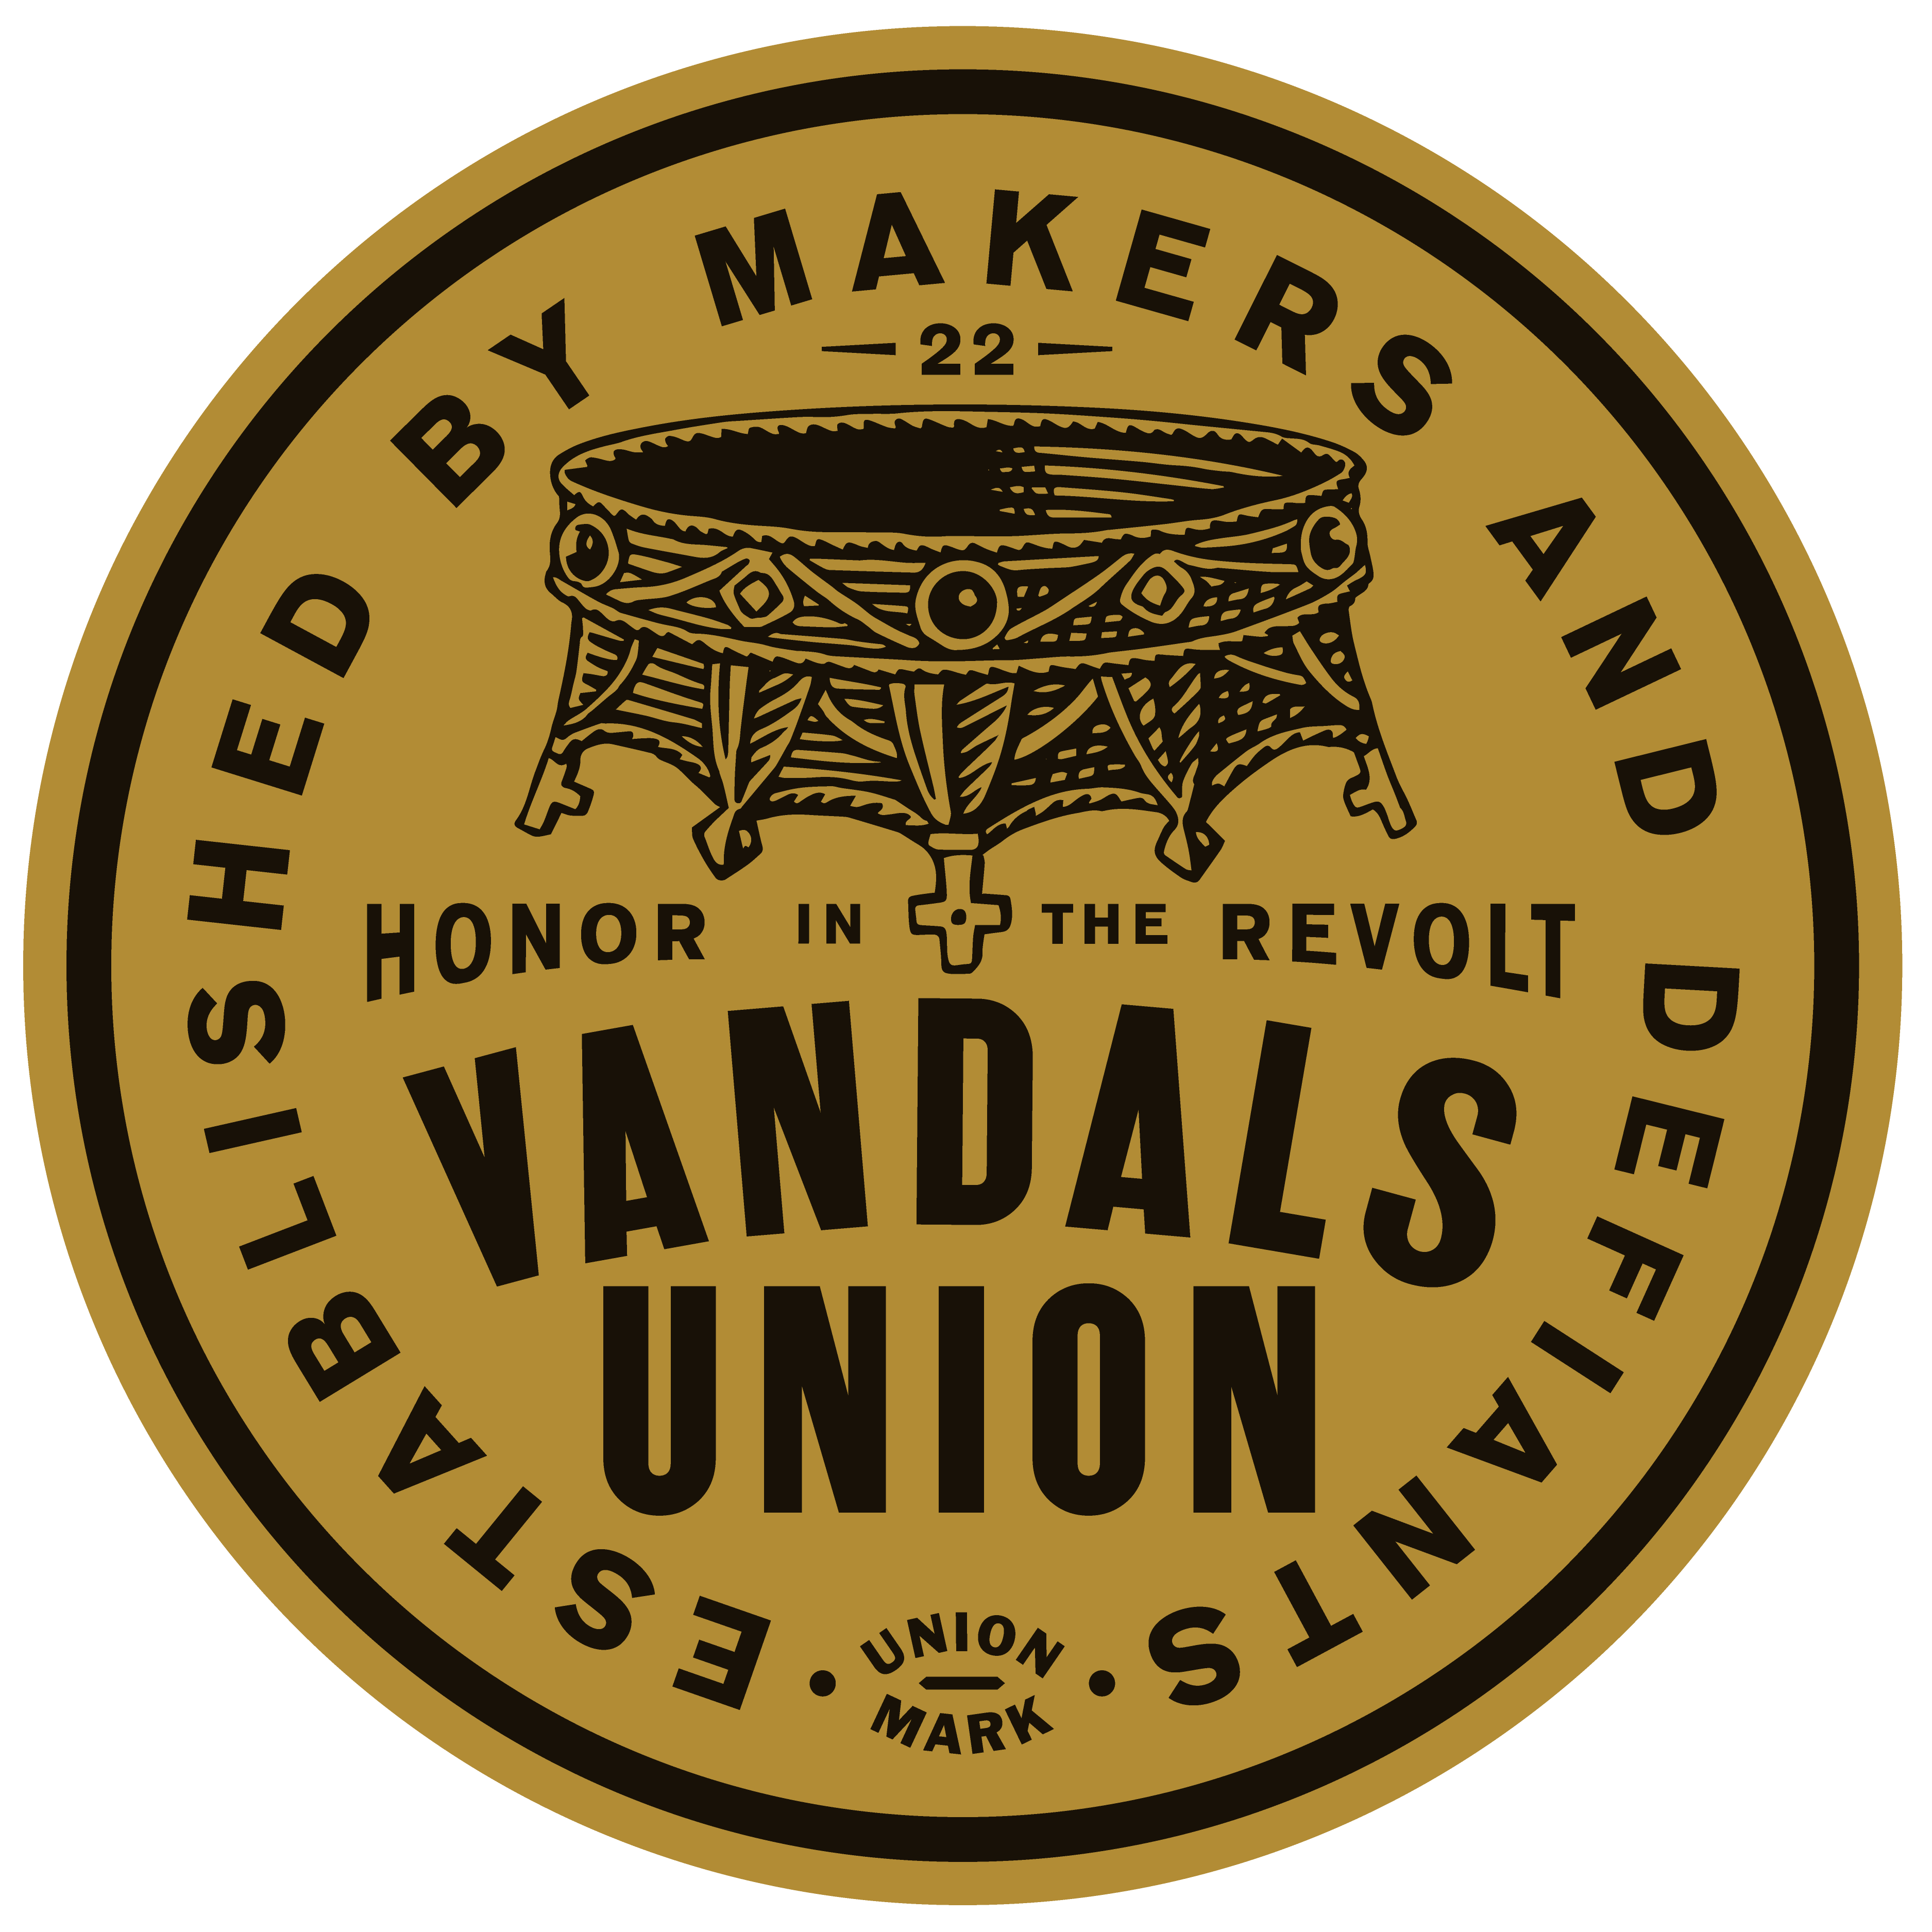 Vandals Union logo design by logo designer Chad Michael Studio for your inspiration and for the worlds largest logo competition